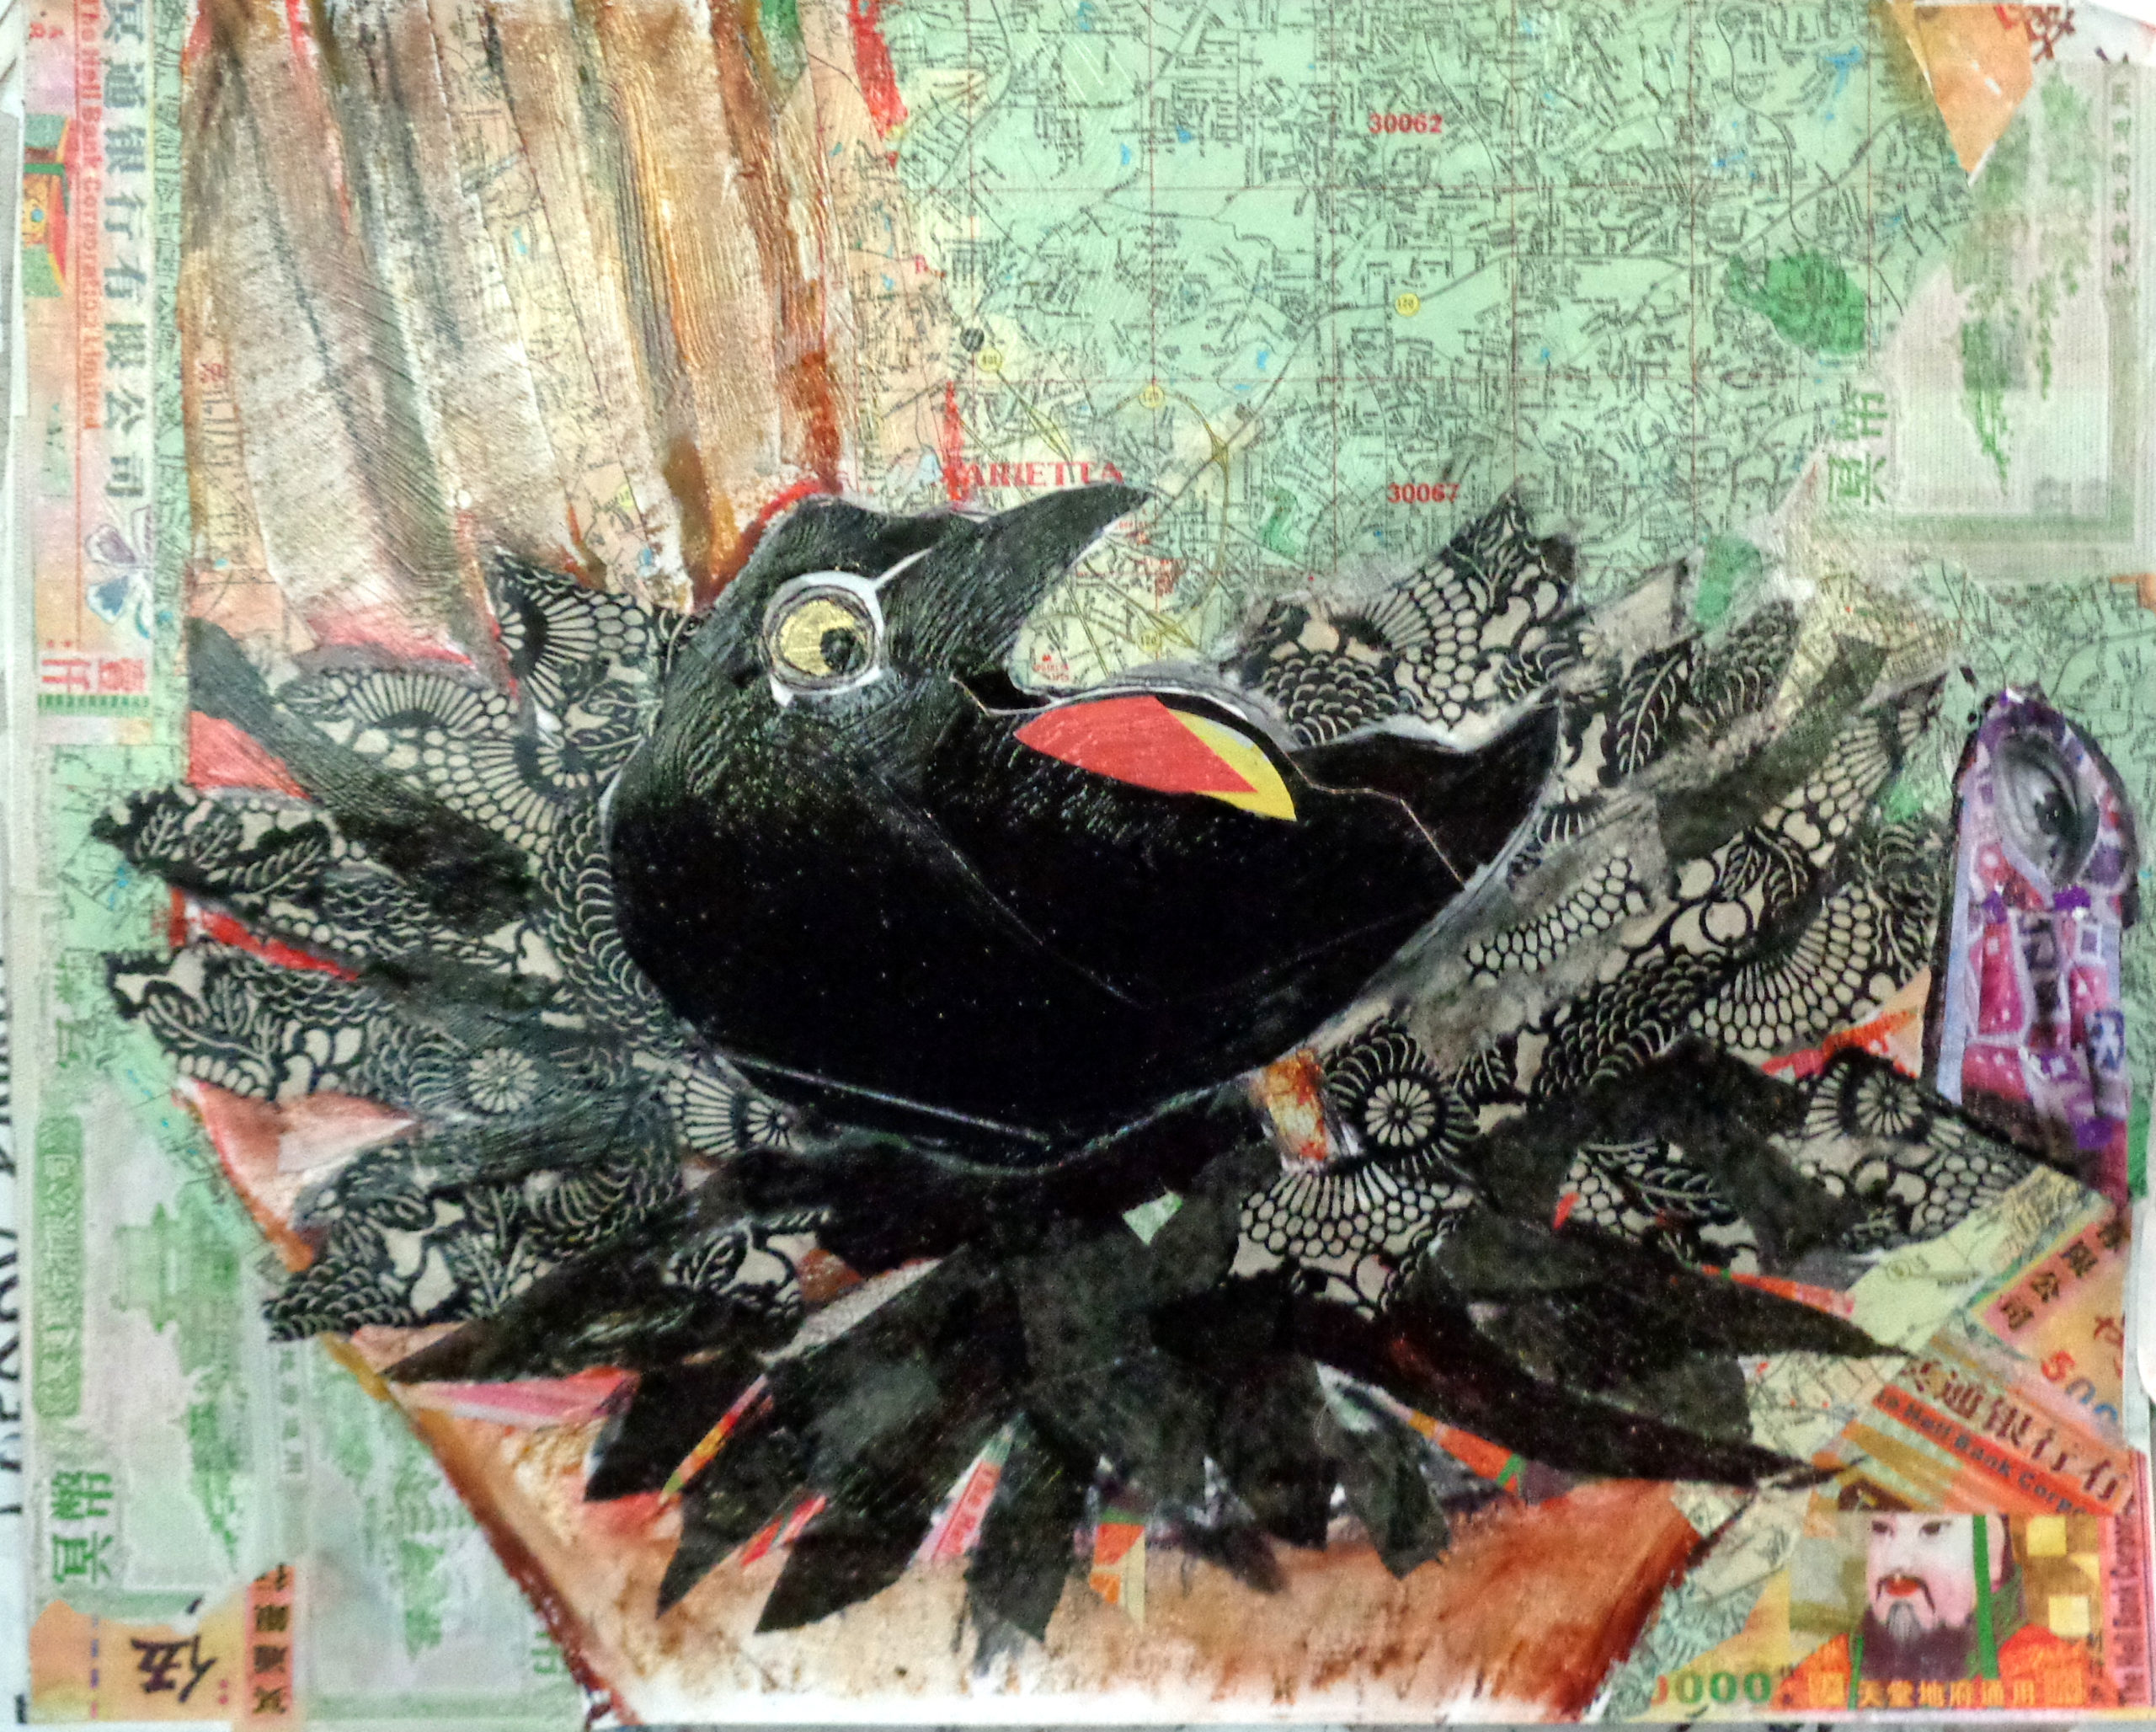 Surprises by Kathryn DeMarco, collage, 16 x 20